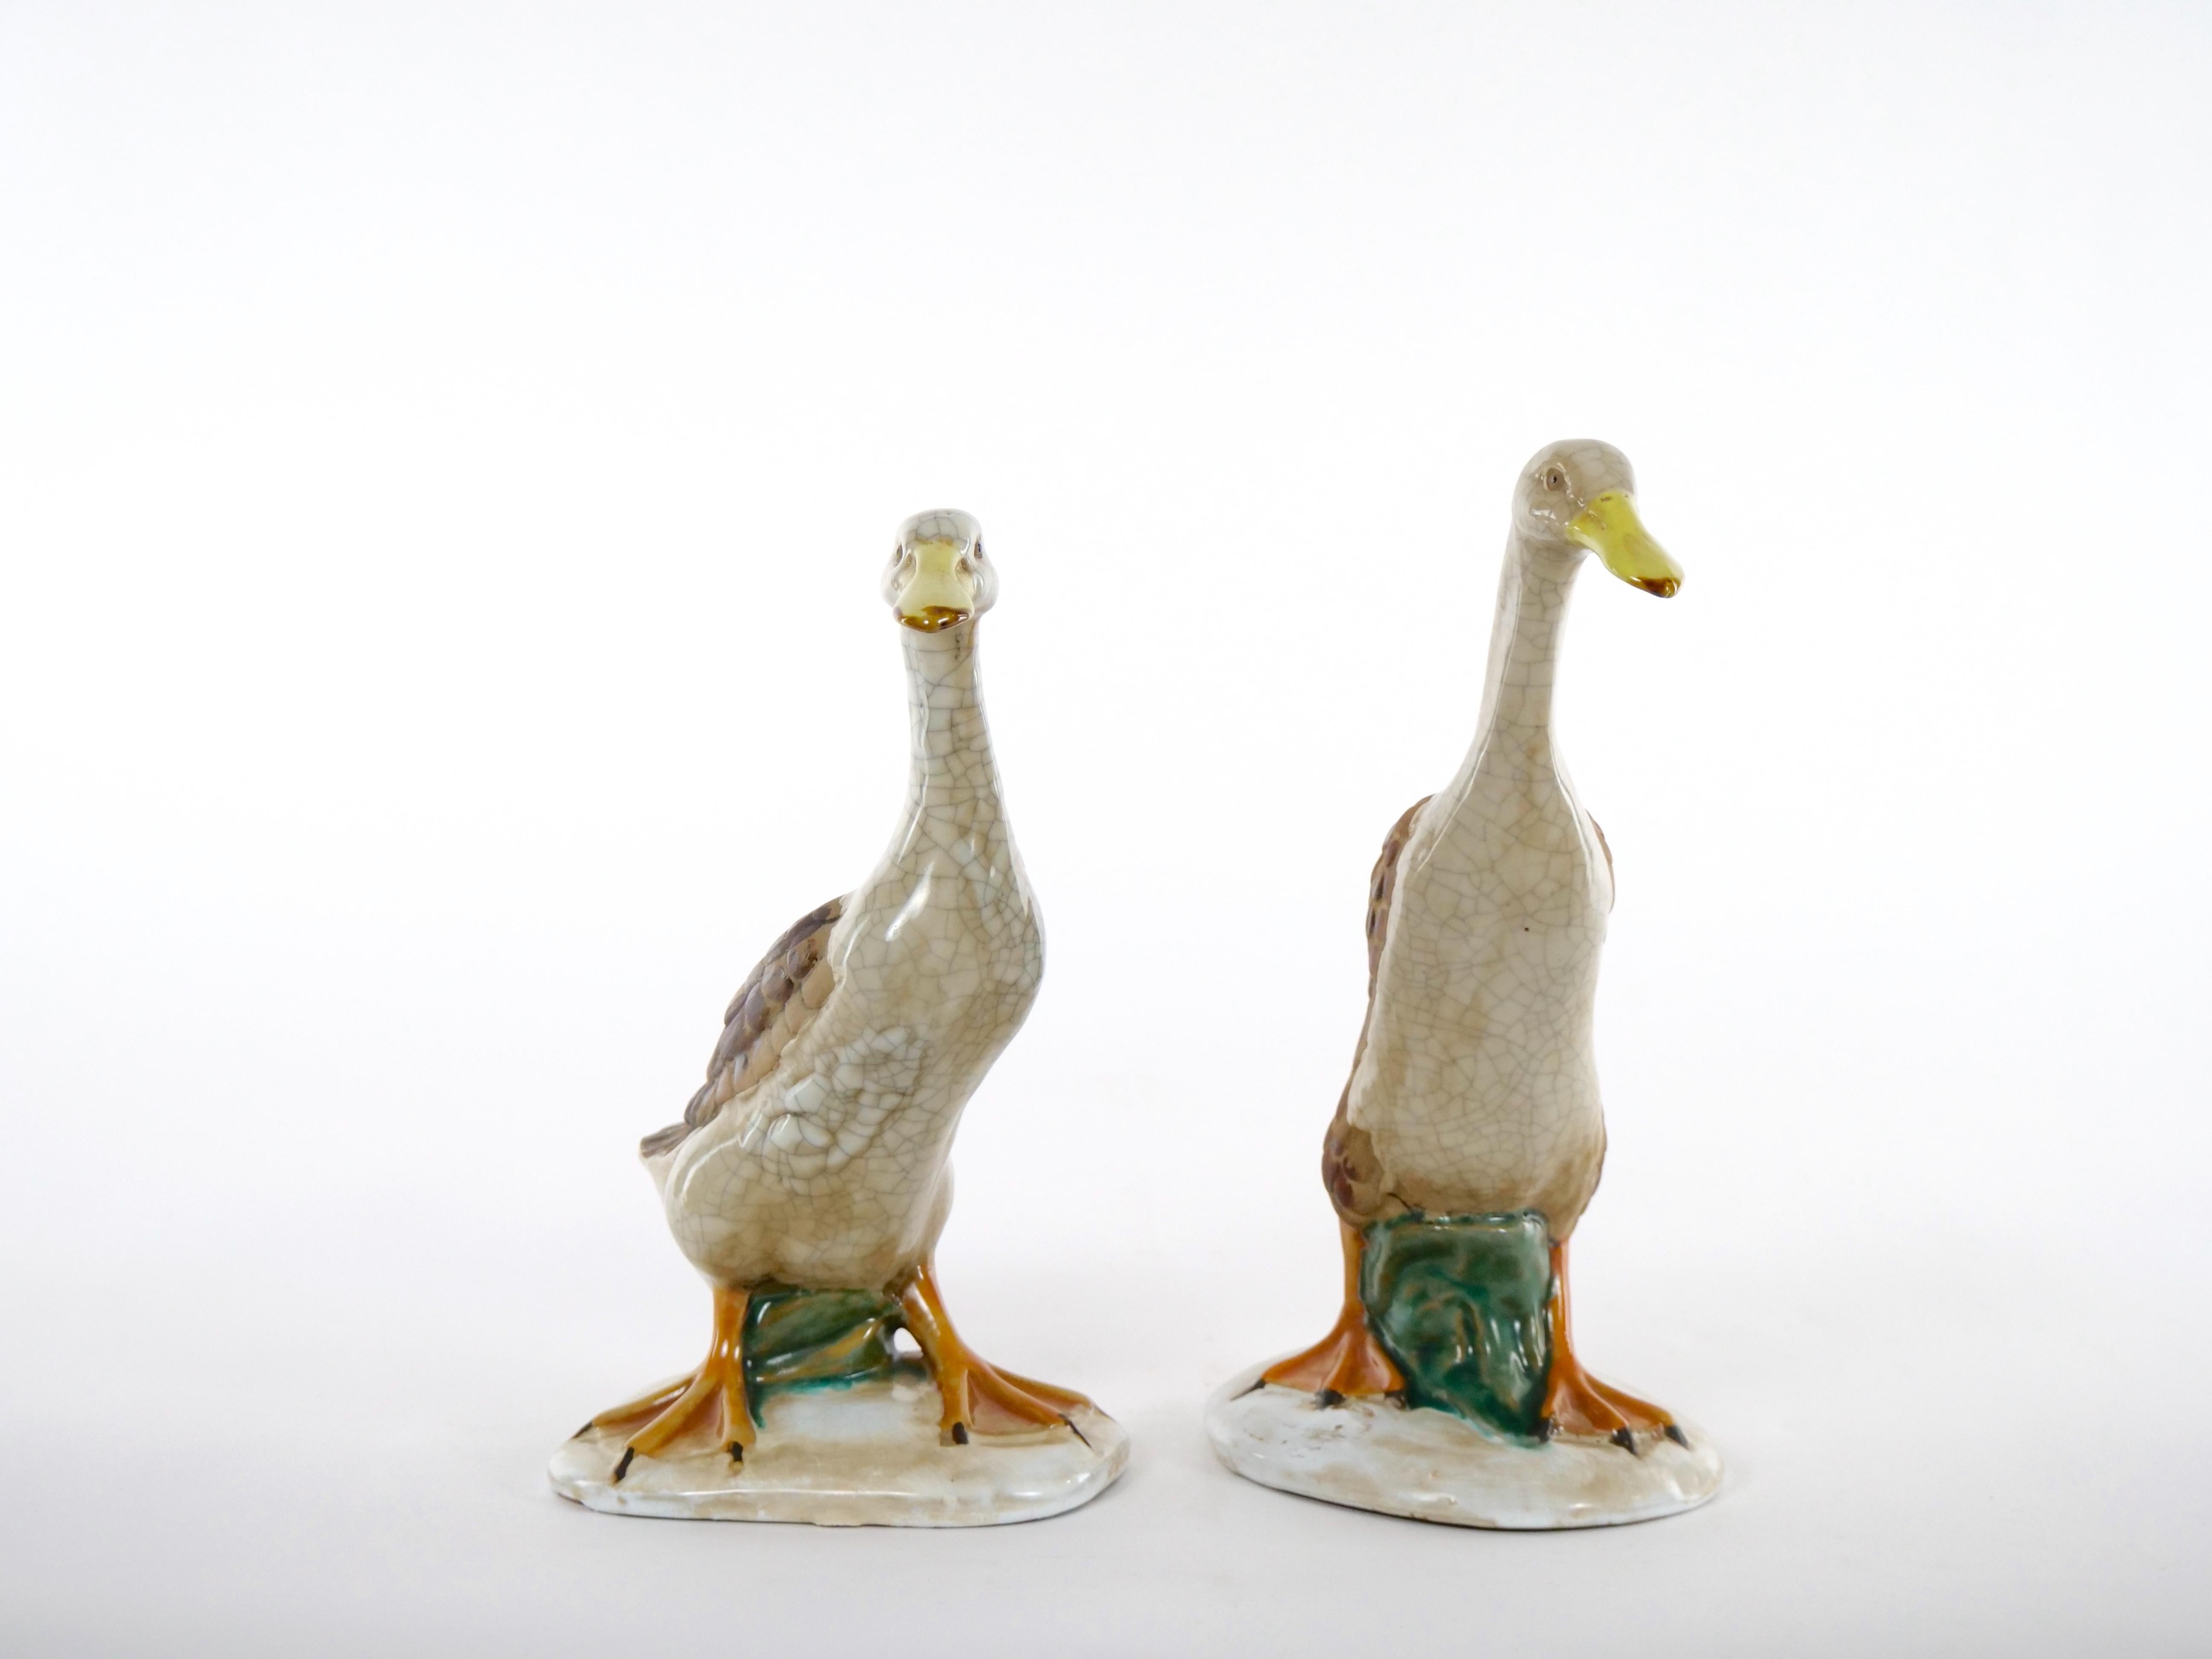 Beautiful English porcelain / terracotta hand painted and glazed decorated pair of decorative duck statues. This stunning large pair of English glazed porcelain tableware decorative ducks are executed in vibrant colors of orange , brown, beige,